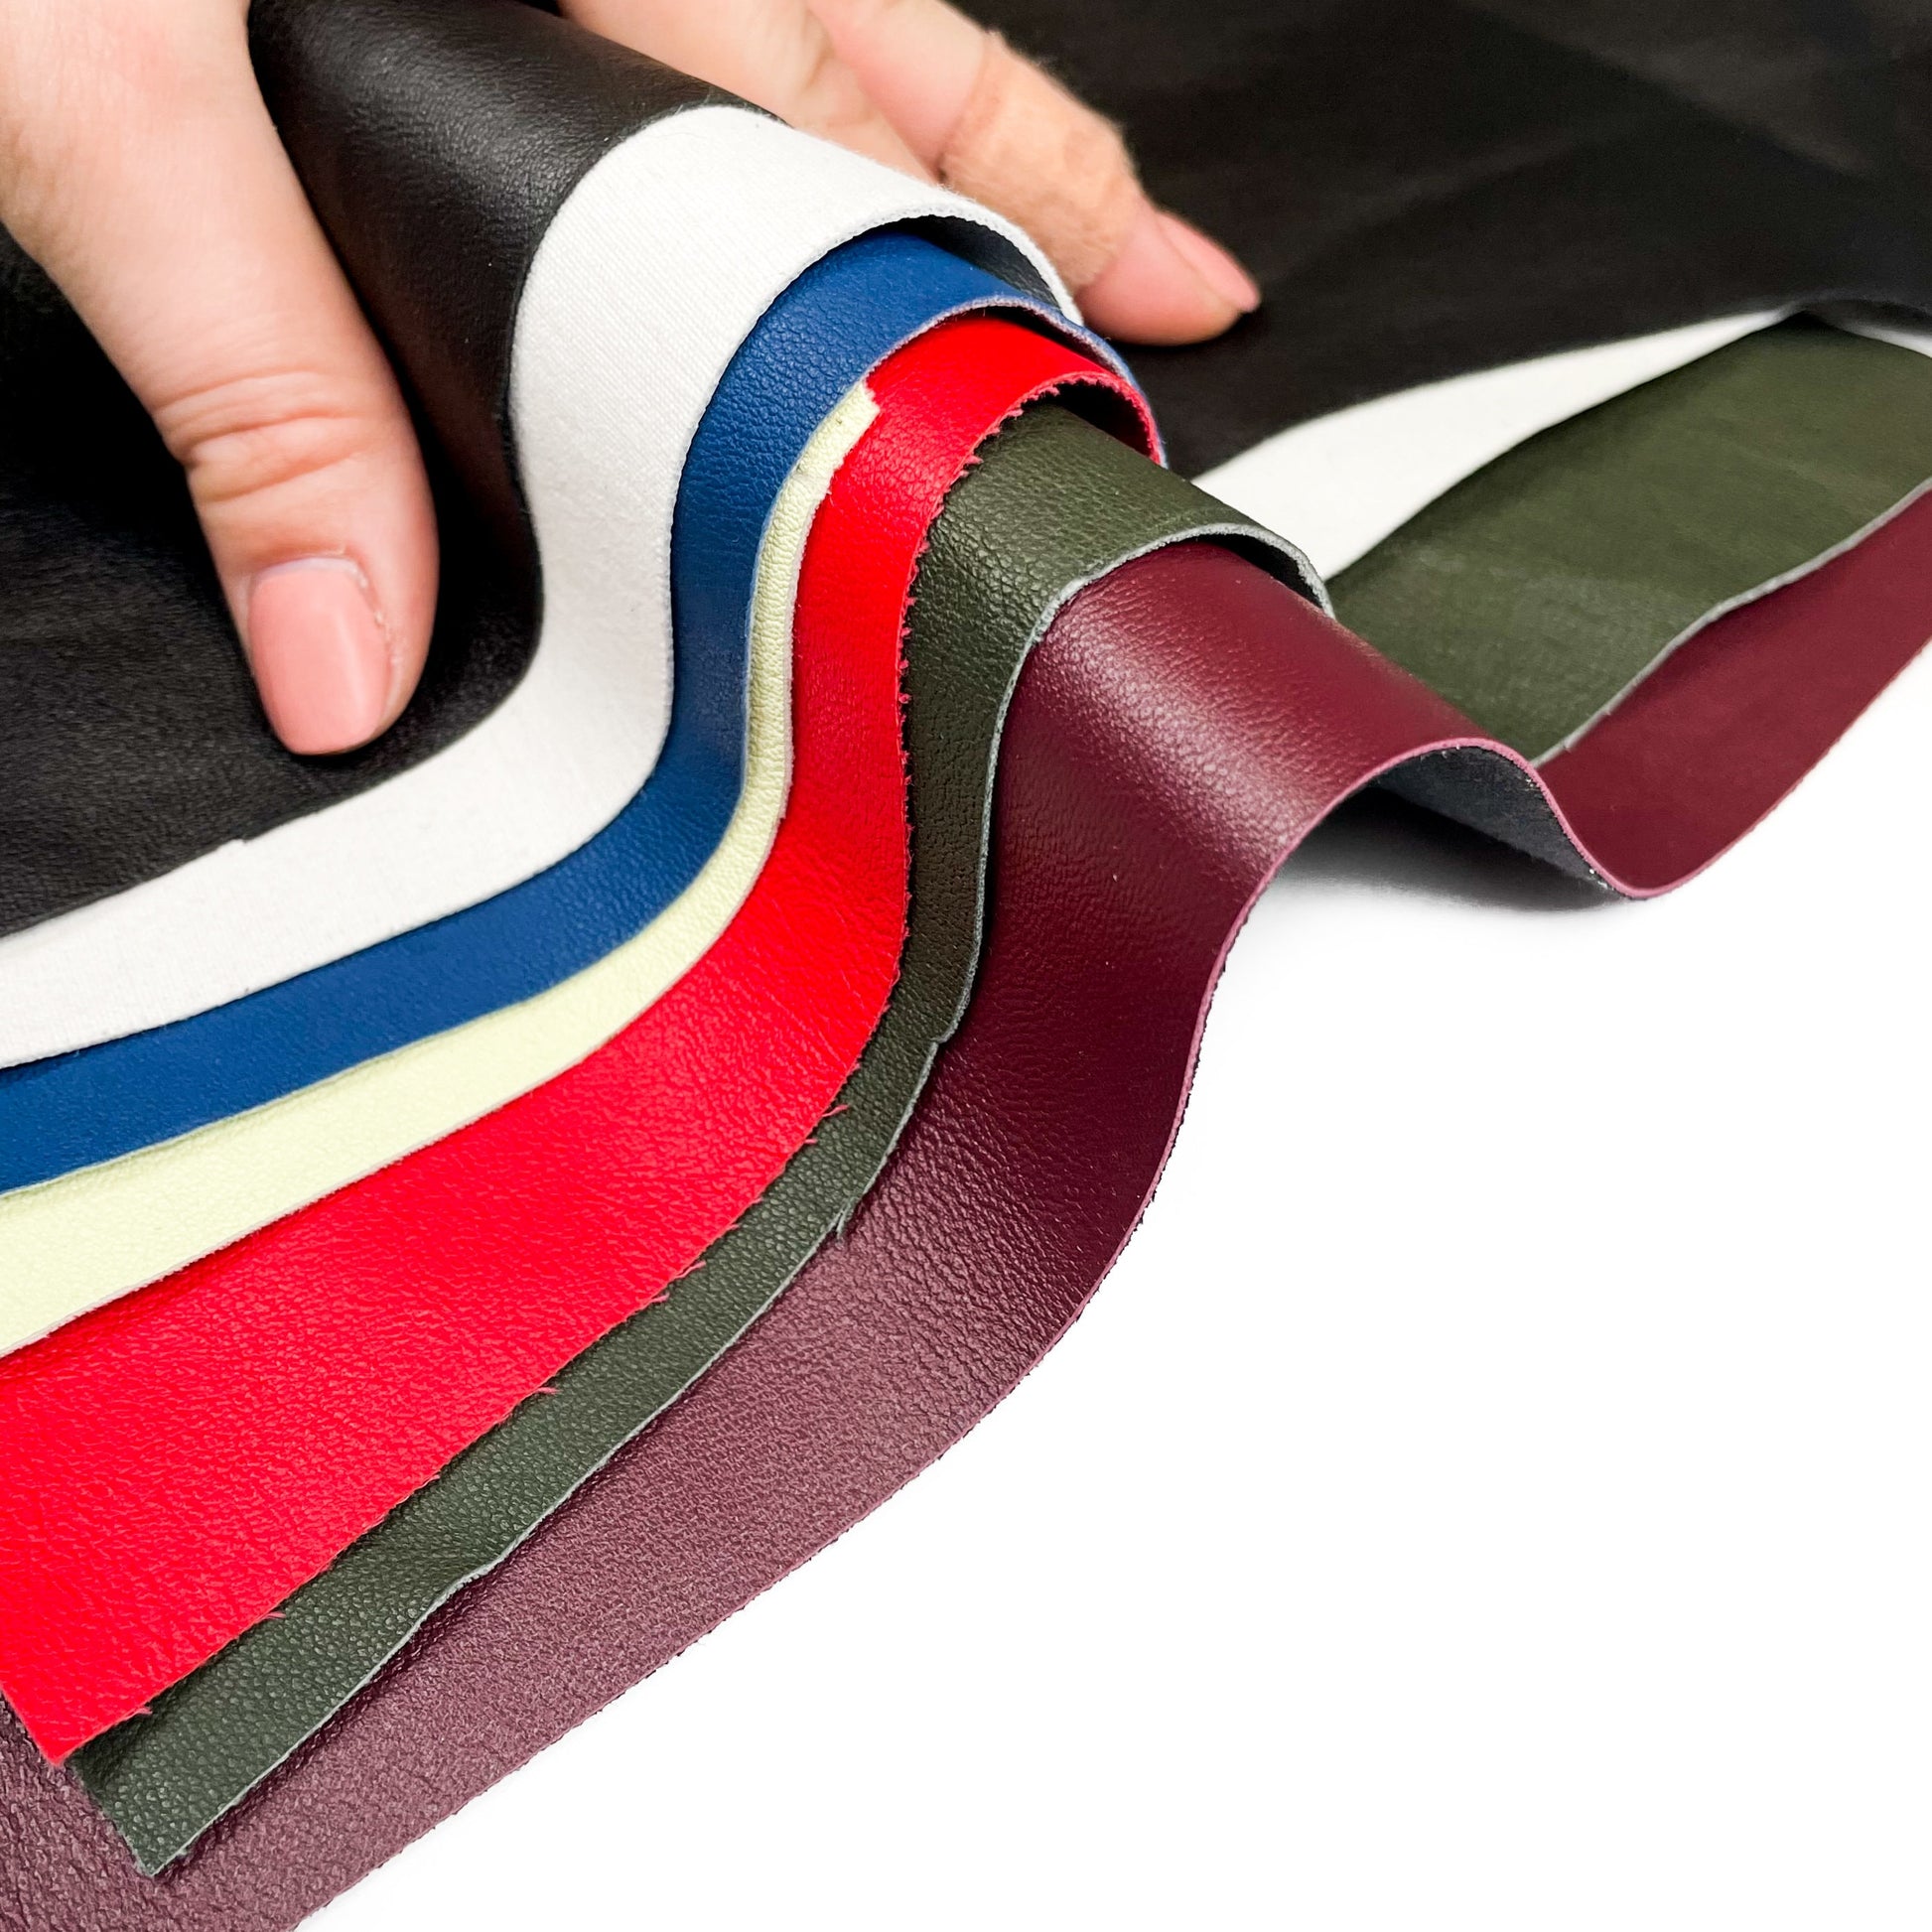 Stretch Leather Scraps Mix Thin Elastic Fabric On Cotton Colorful